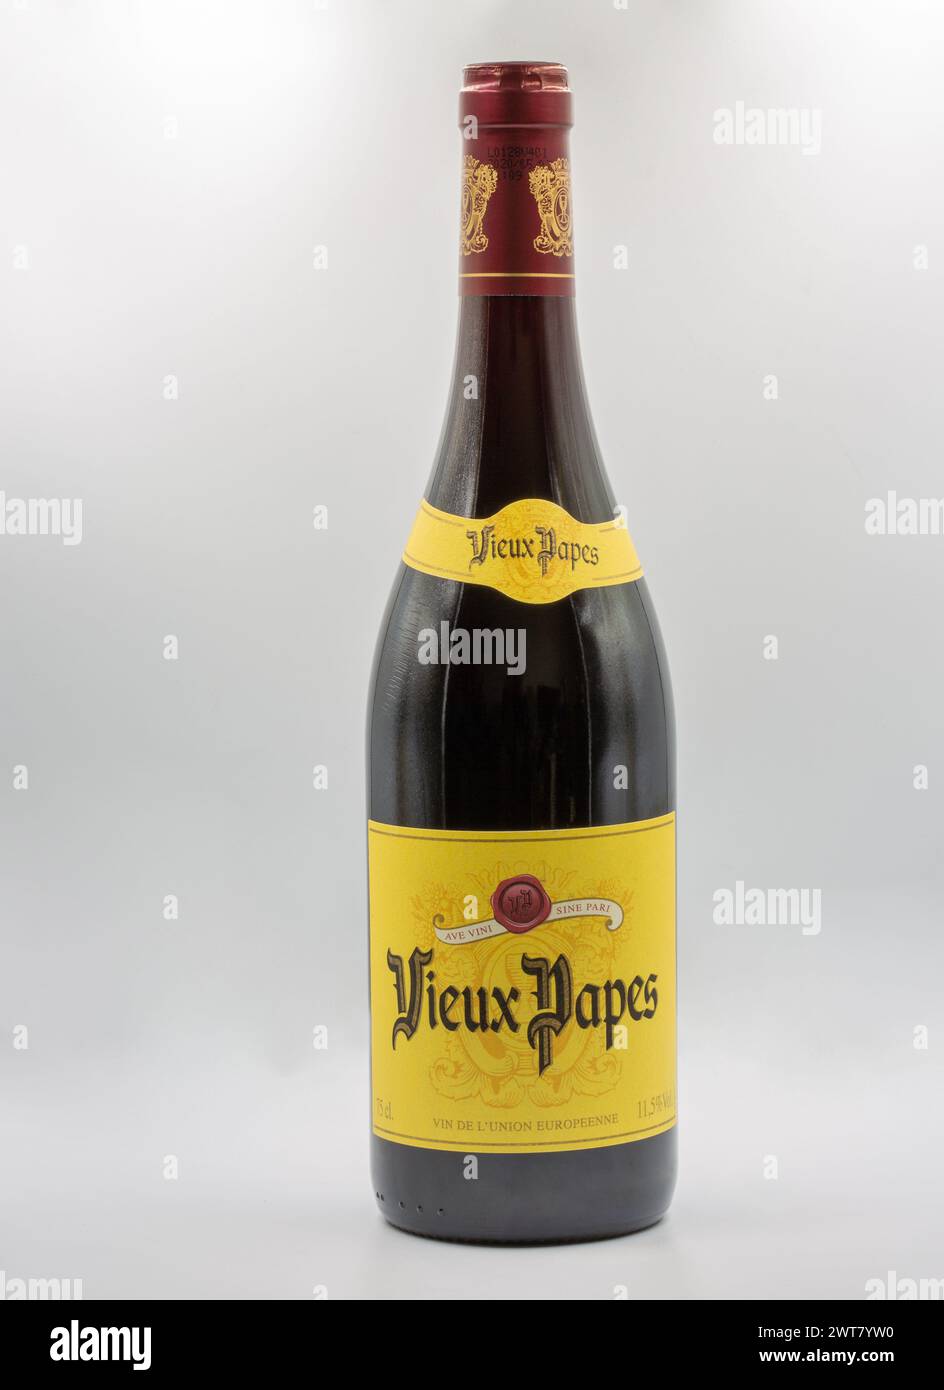 Kyiv, Ukraine - August 10, 2022: Studio shoot of Vieux Papes French red dry wine bottle closeup against white background. Stock Photo